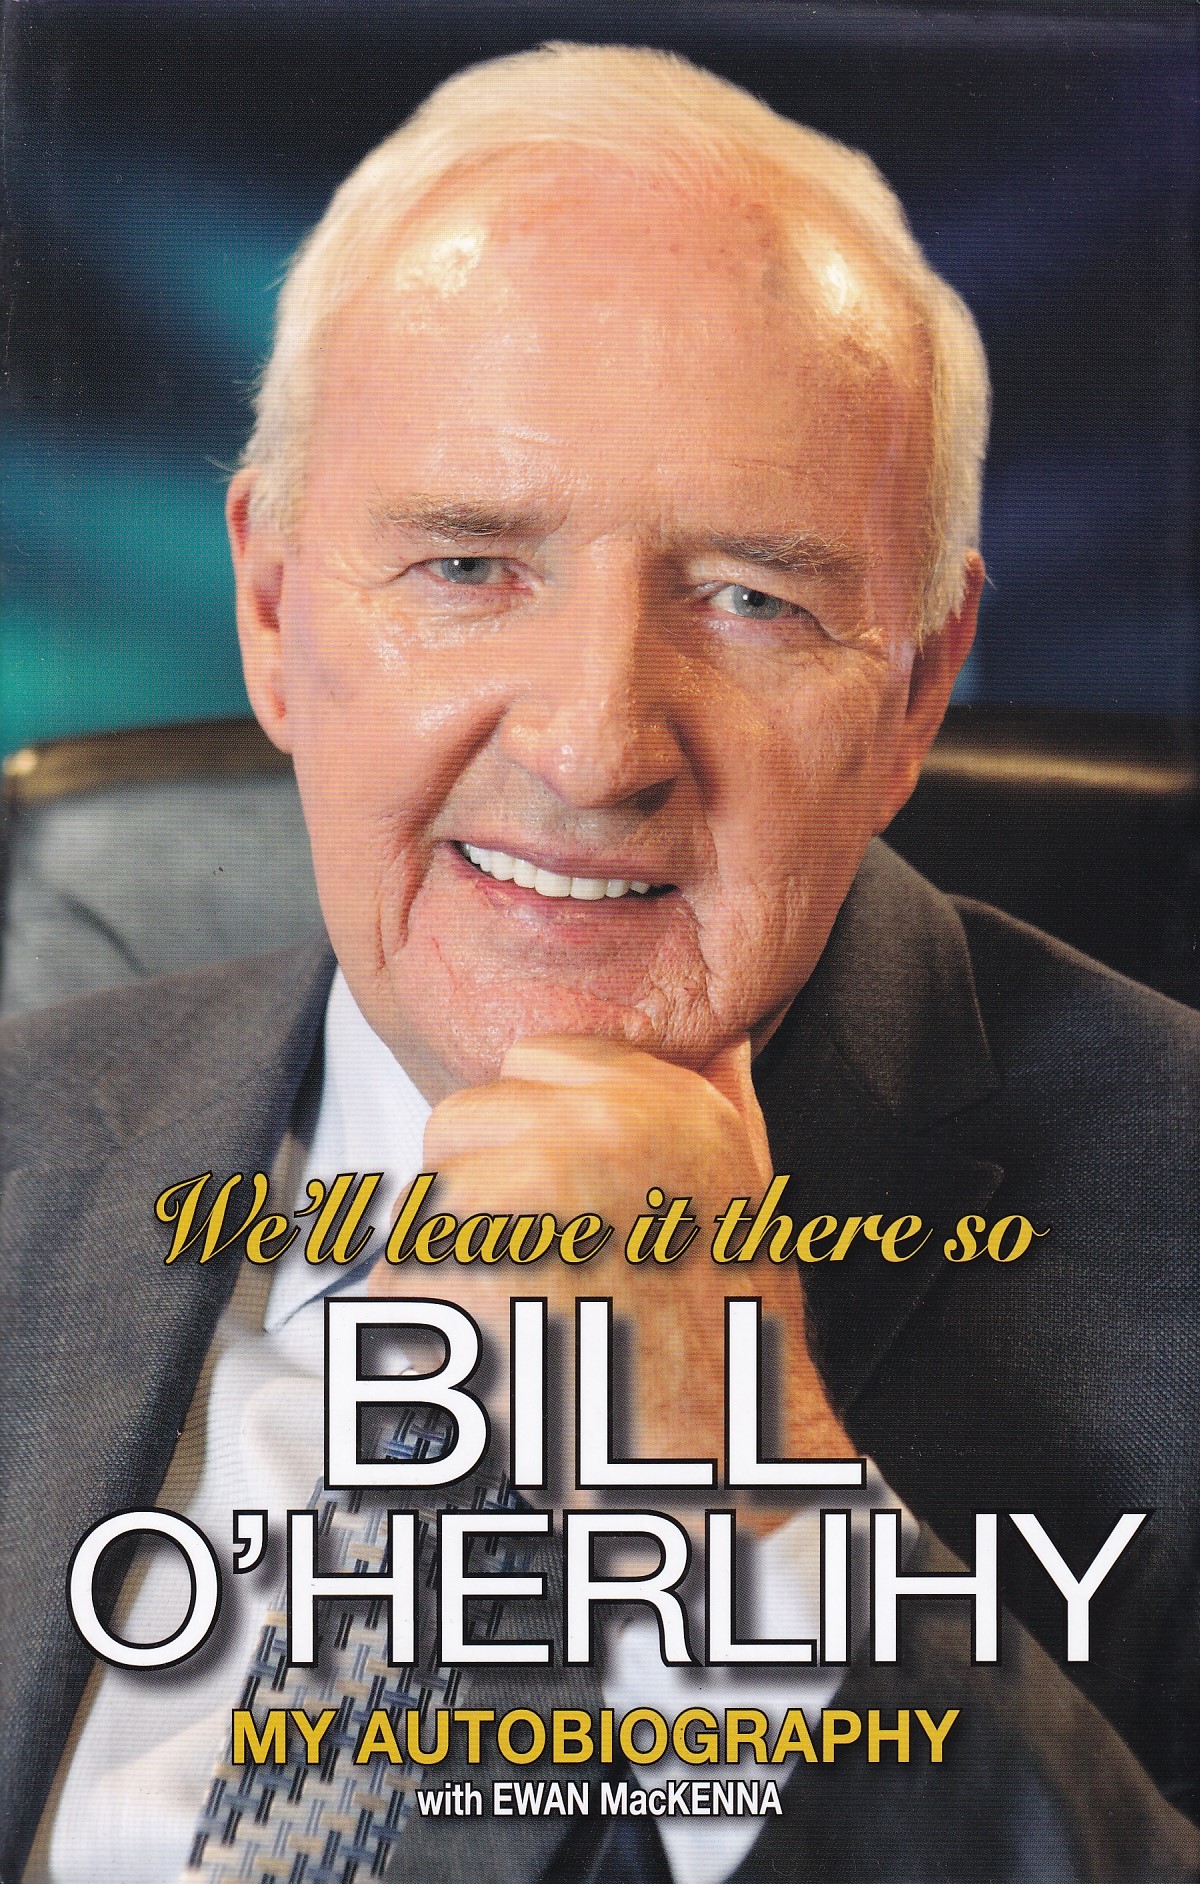 We’ll Leave it There So: Bill O’Herlihy – My Autobiography | Bill O'Herlihy (with Ewan MacKenna) | Charlie Byrne's